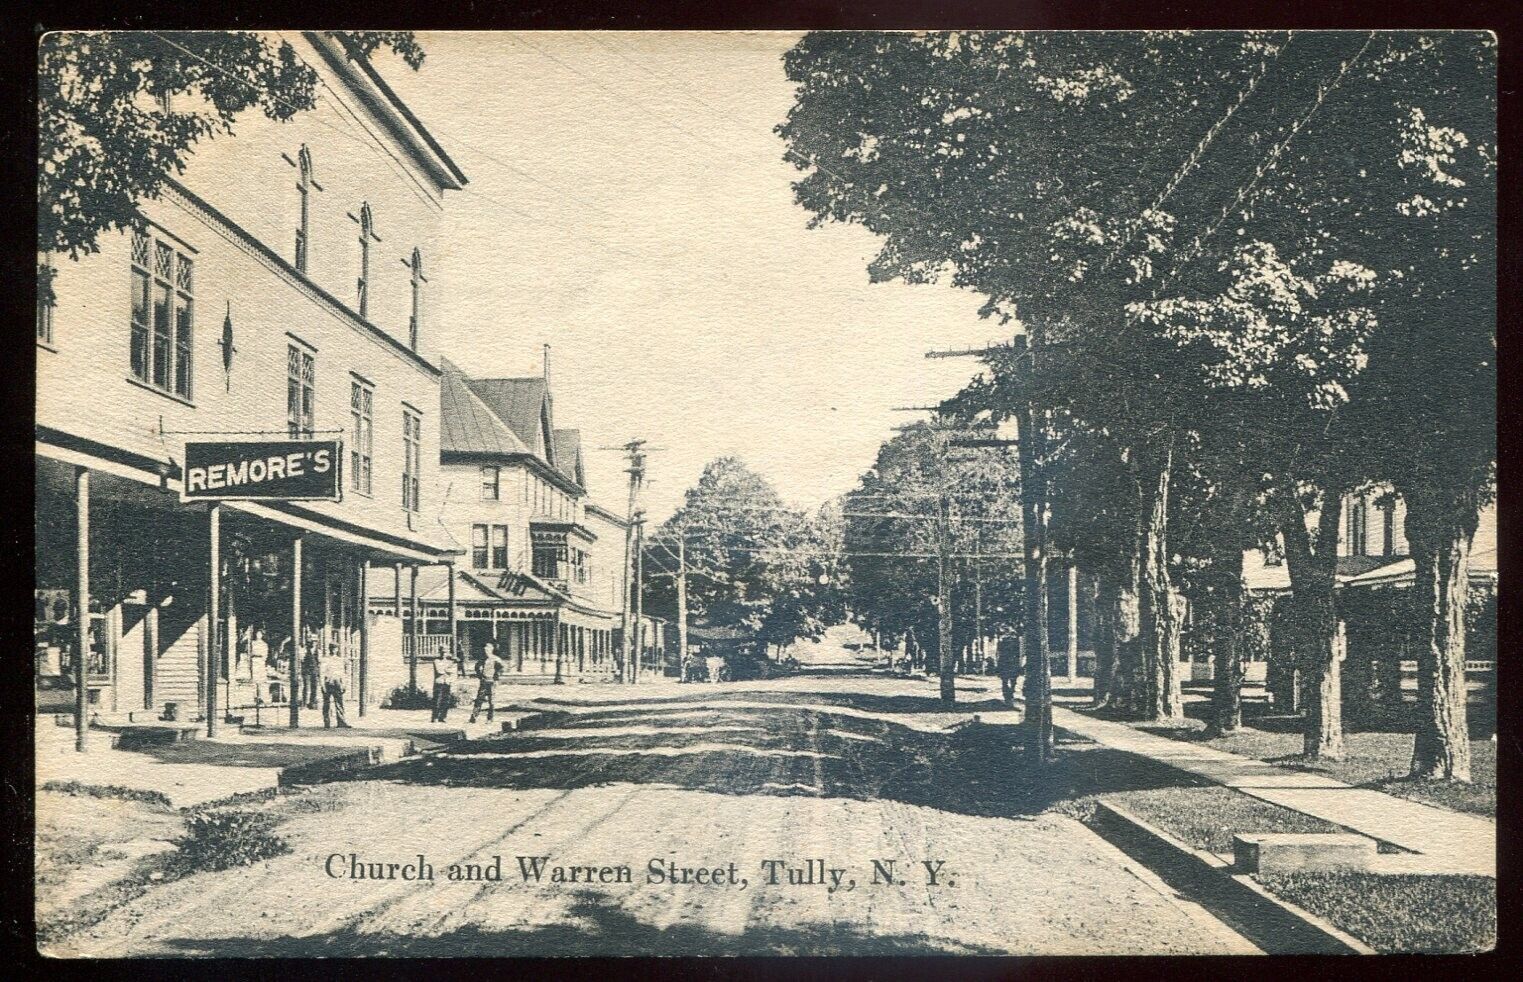 TULLY New York Postcard 1910s Church & Warren Street Stores by Wright